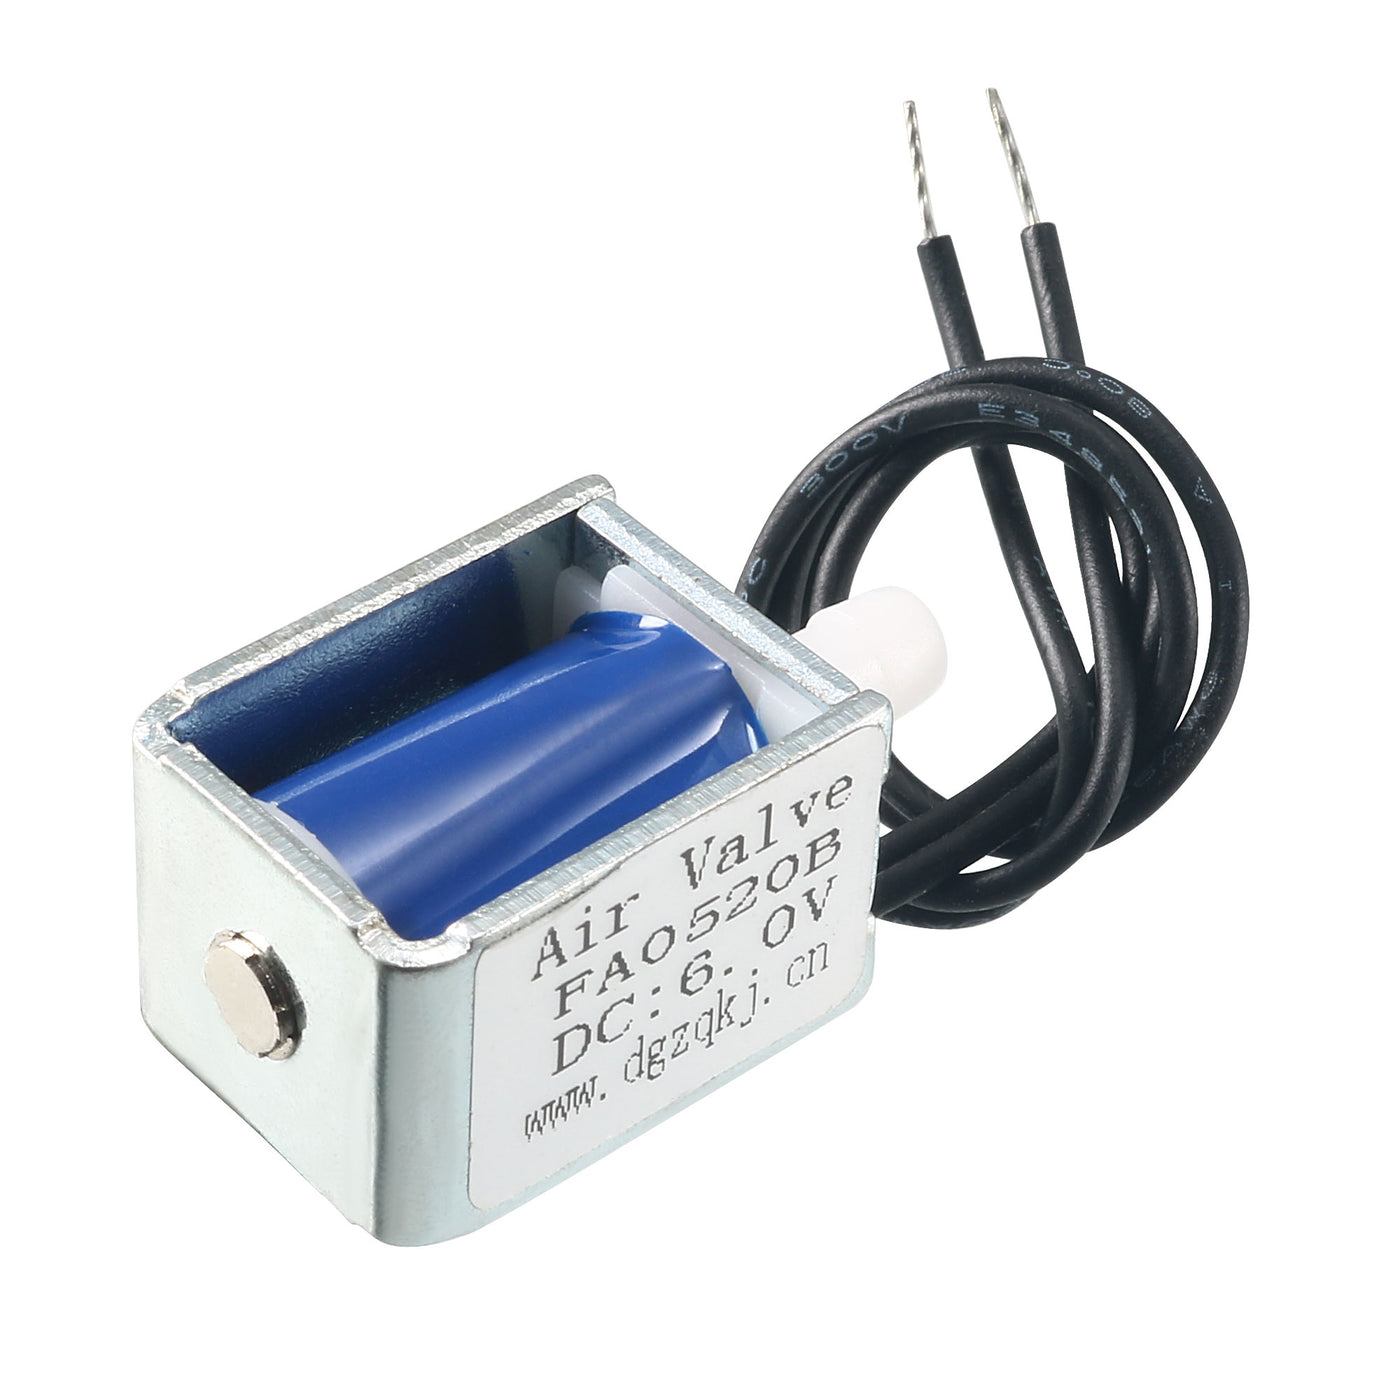 uxcell Uxcell Miniature Solenoid Valve Normally Closed DC6V 0.24A Air Solenoid Valve